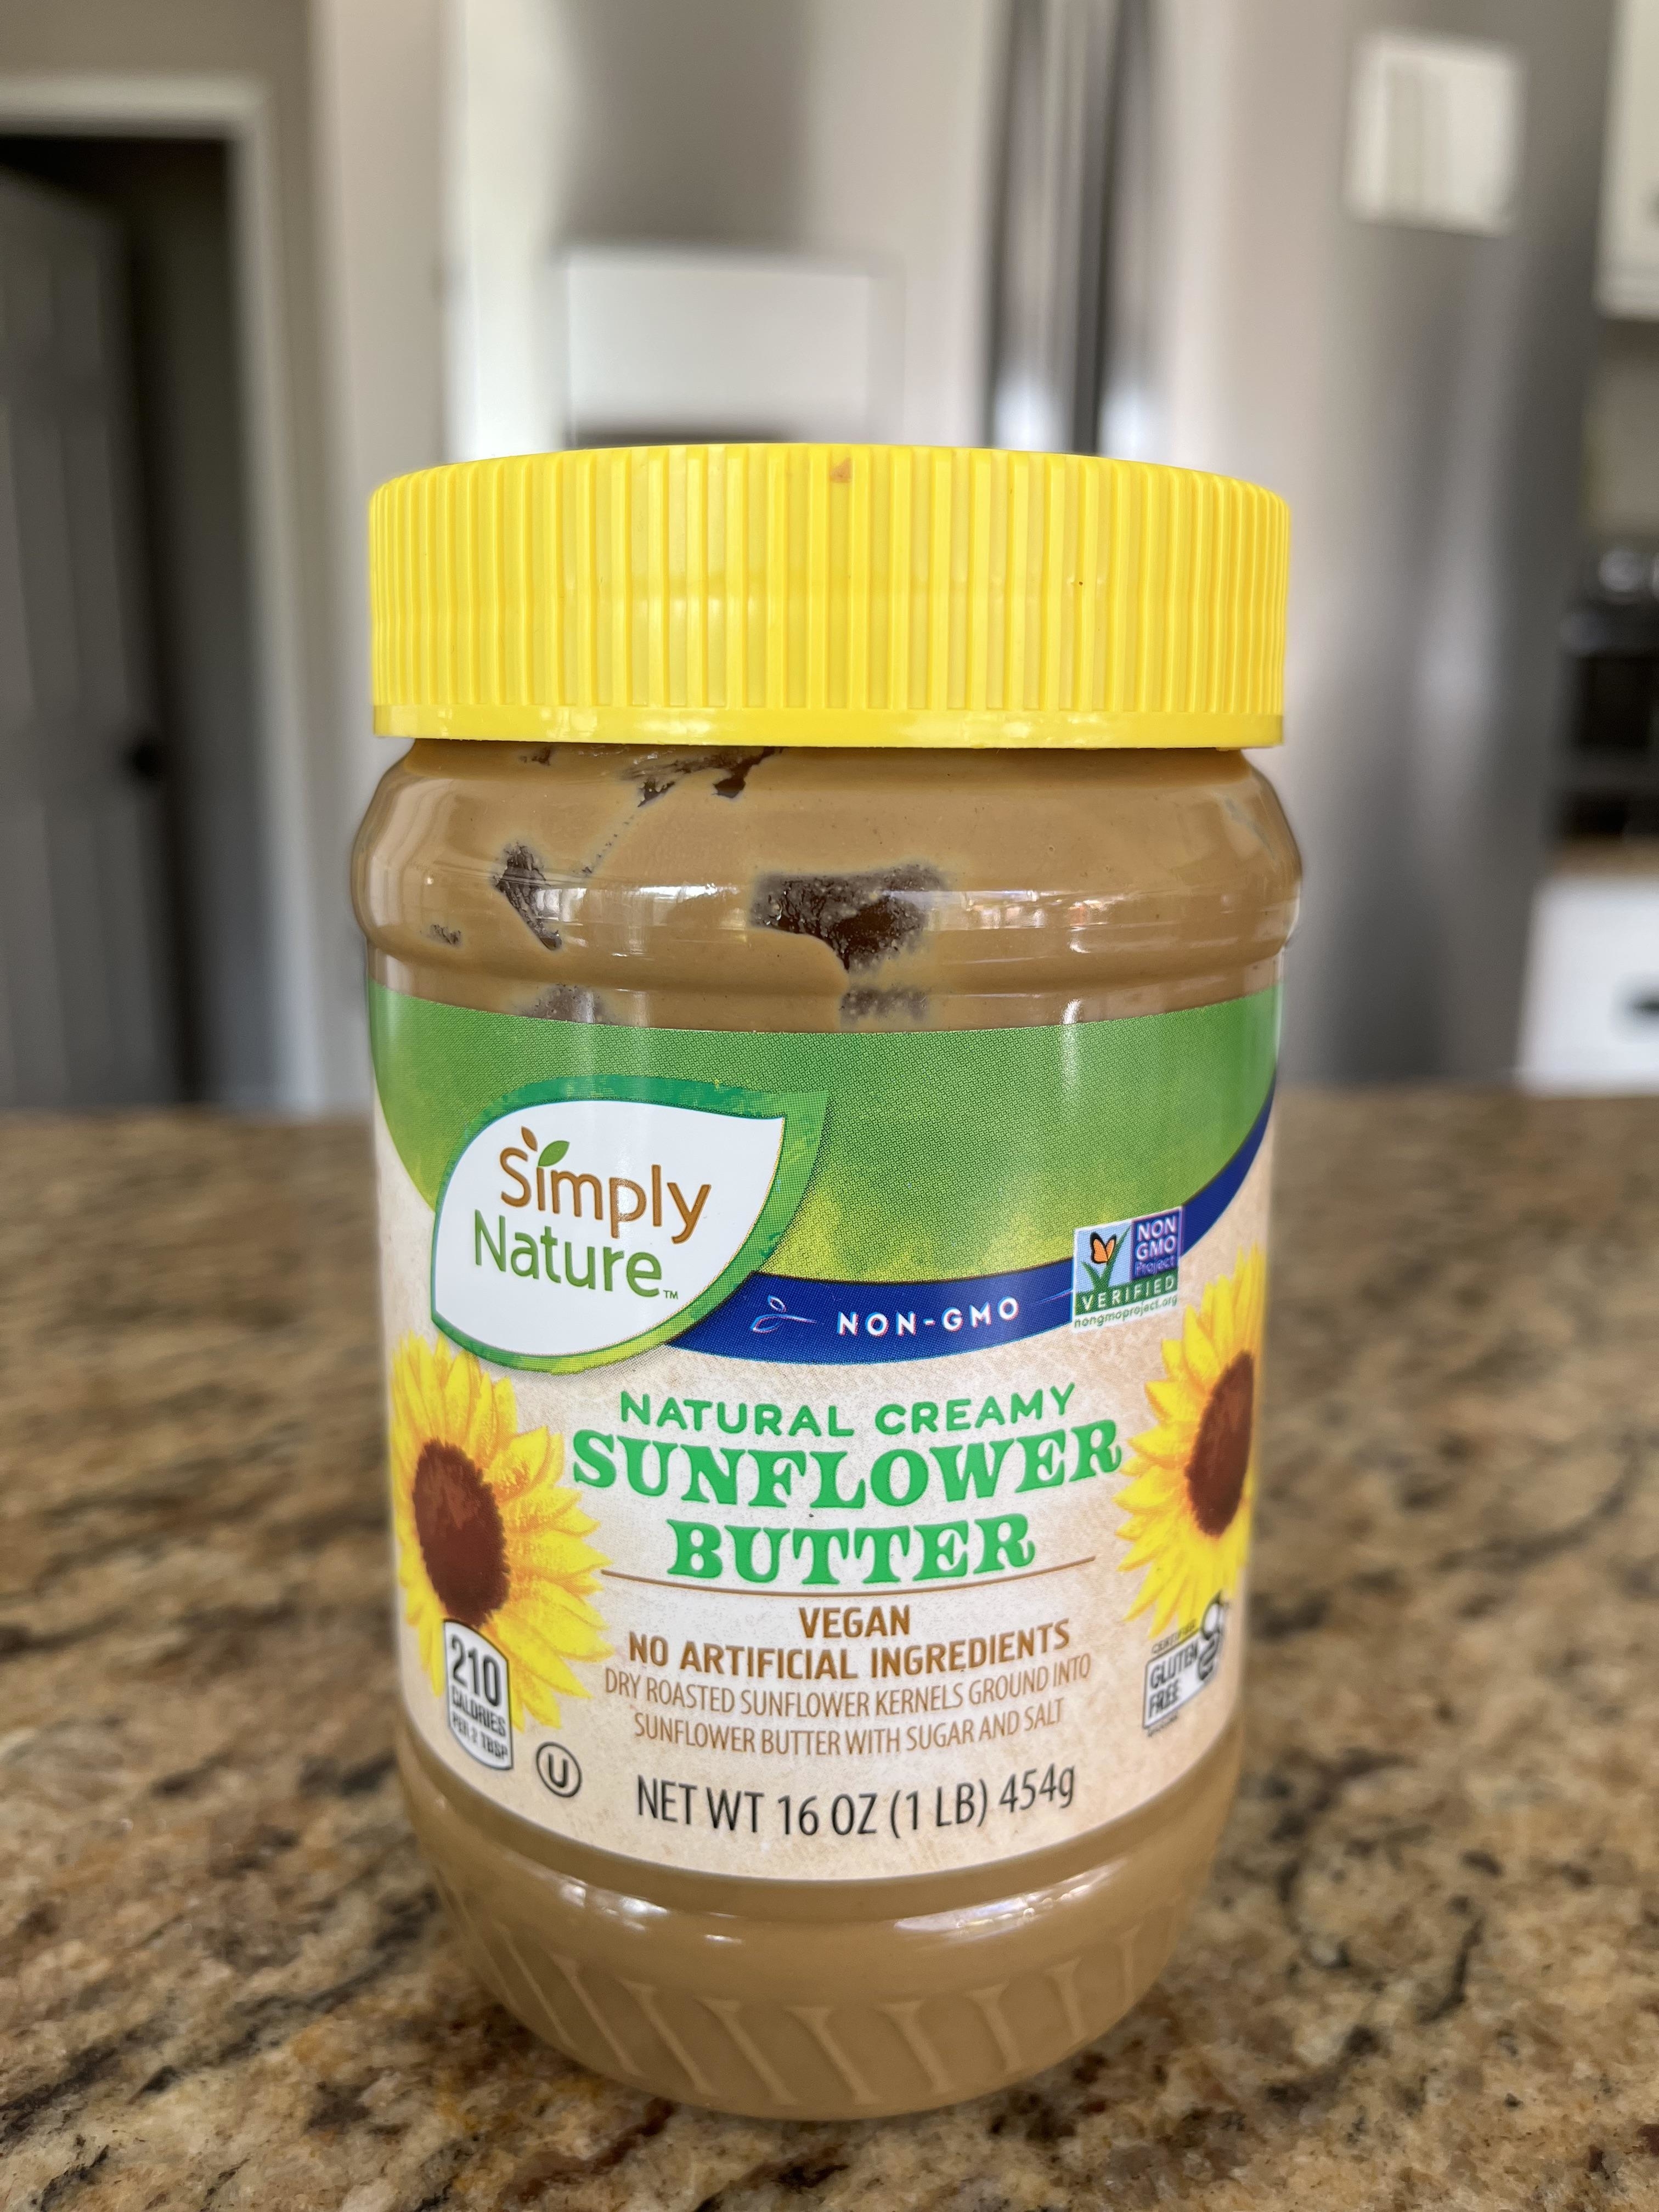 A jar of Simply Nature creamy sunflower butter on a kitchen counter